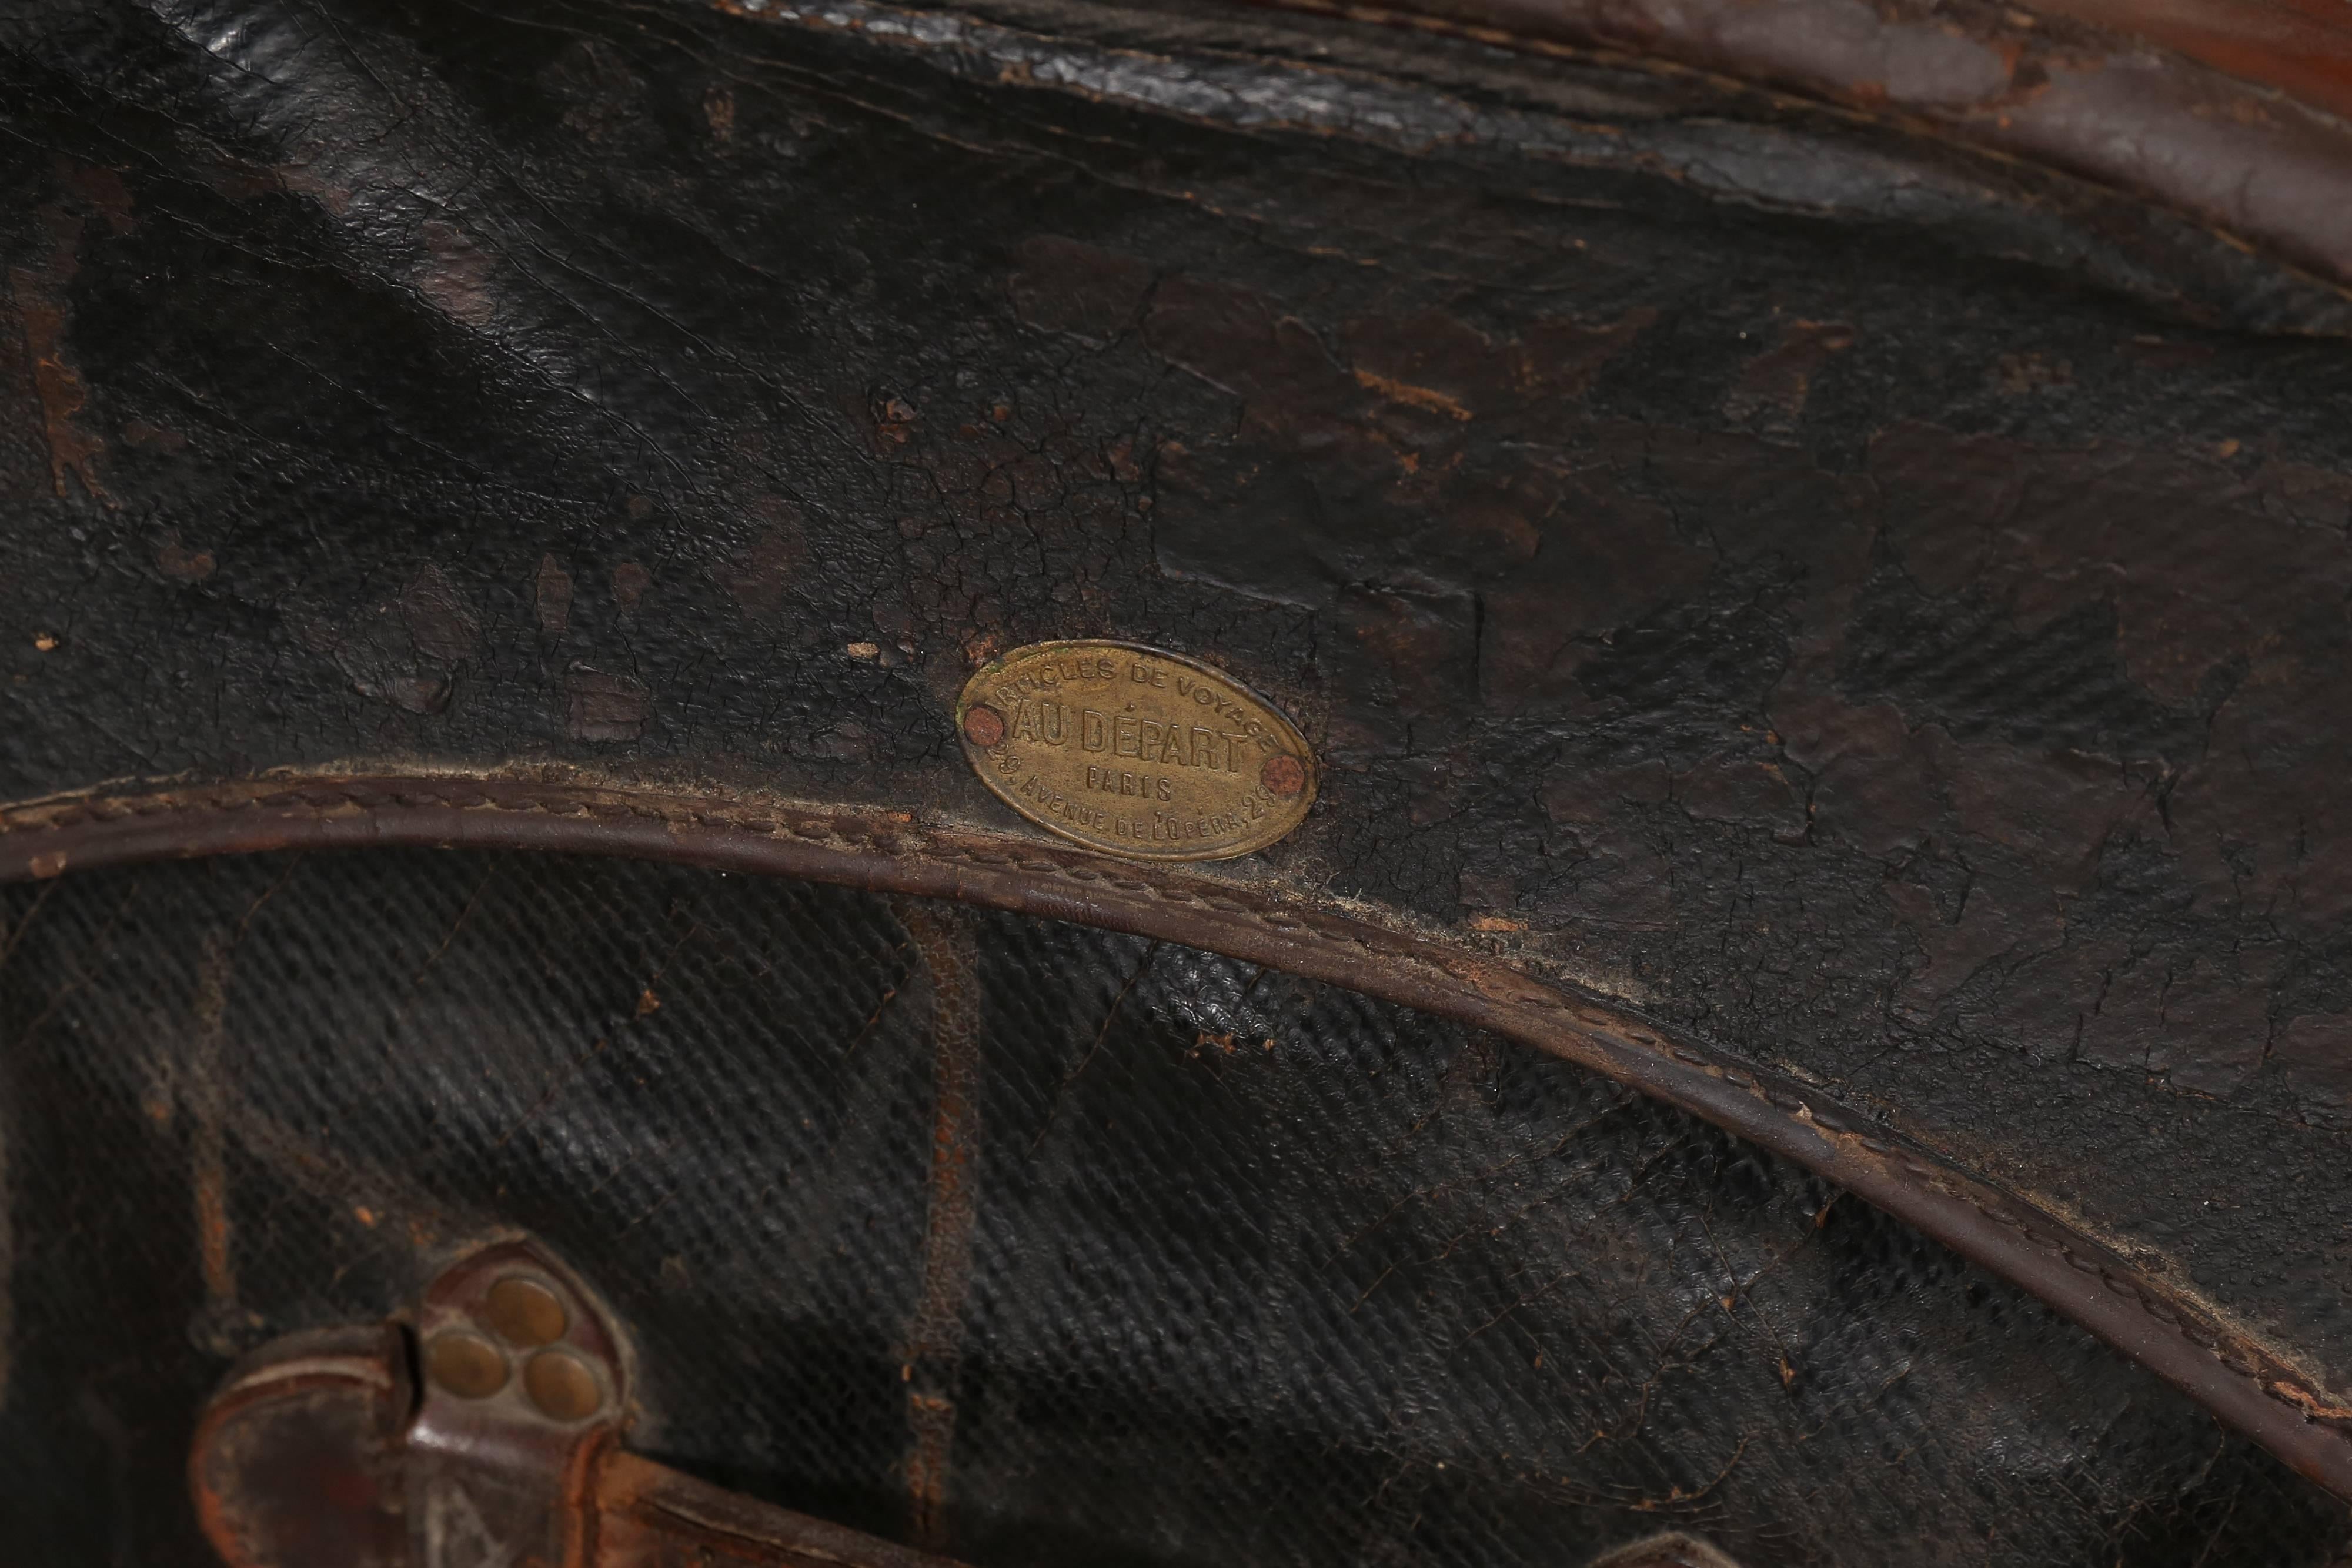 Founded in 1834, Au Depart is considered one of the four greatest French trunk makers. This handsome camel back trunk is superbly constructed of black vulcanized fabric on a woven frame with wood bracings, leather closures and handles attached with